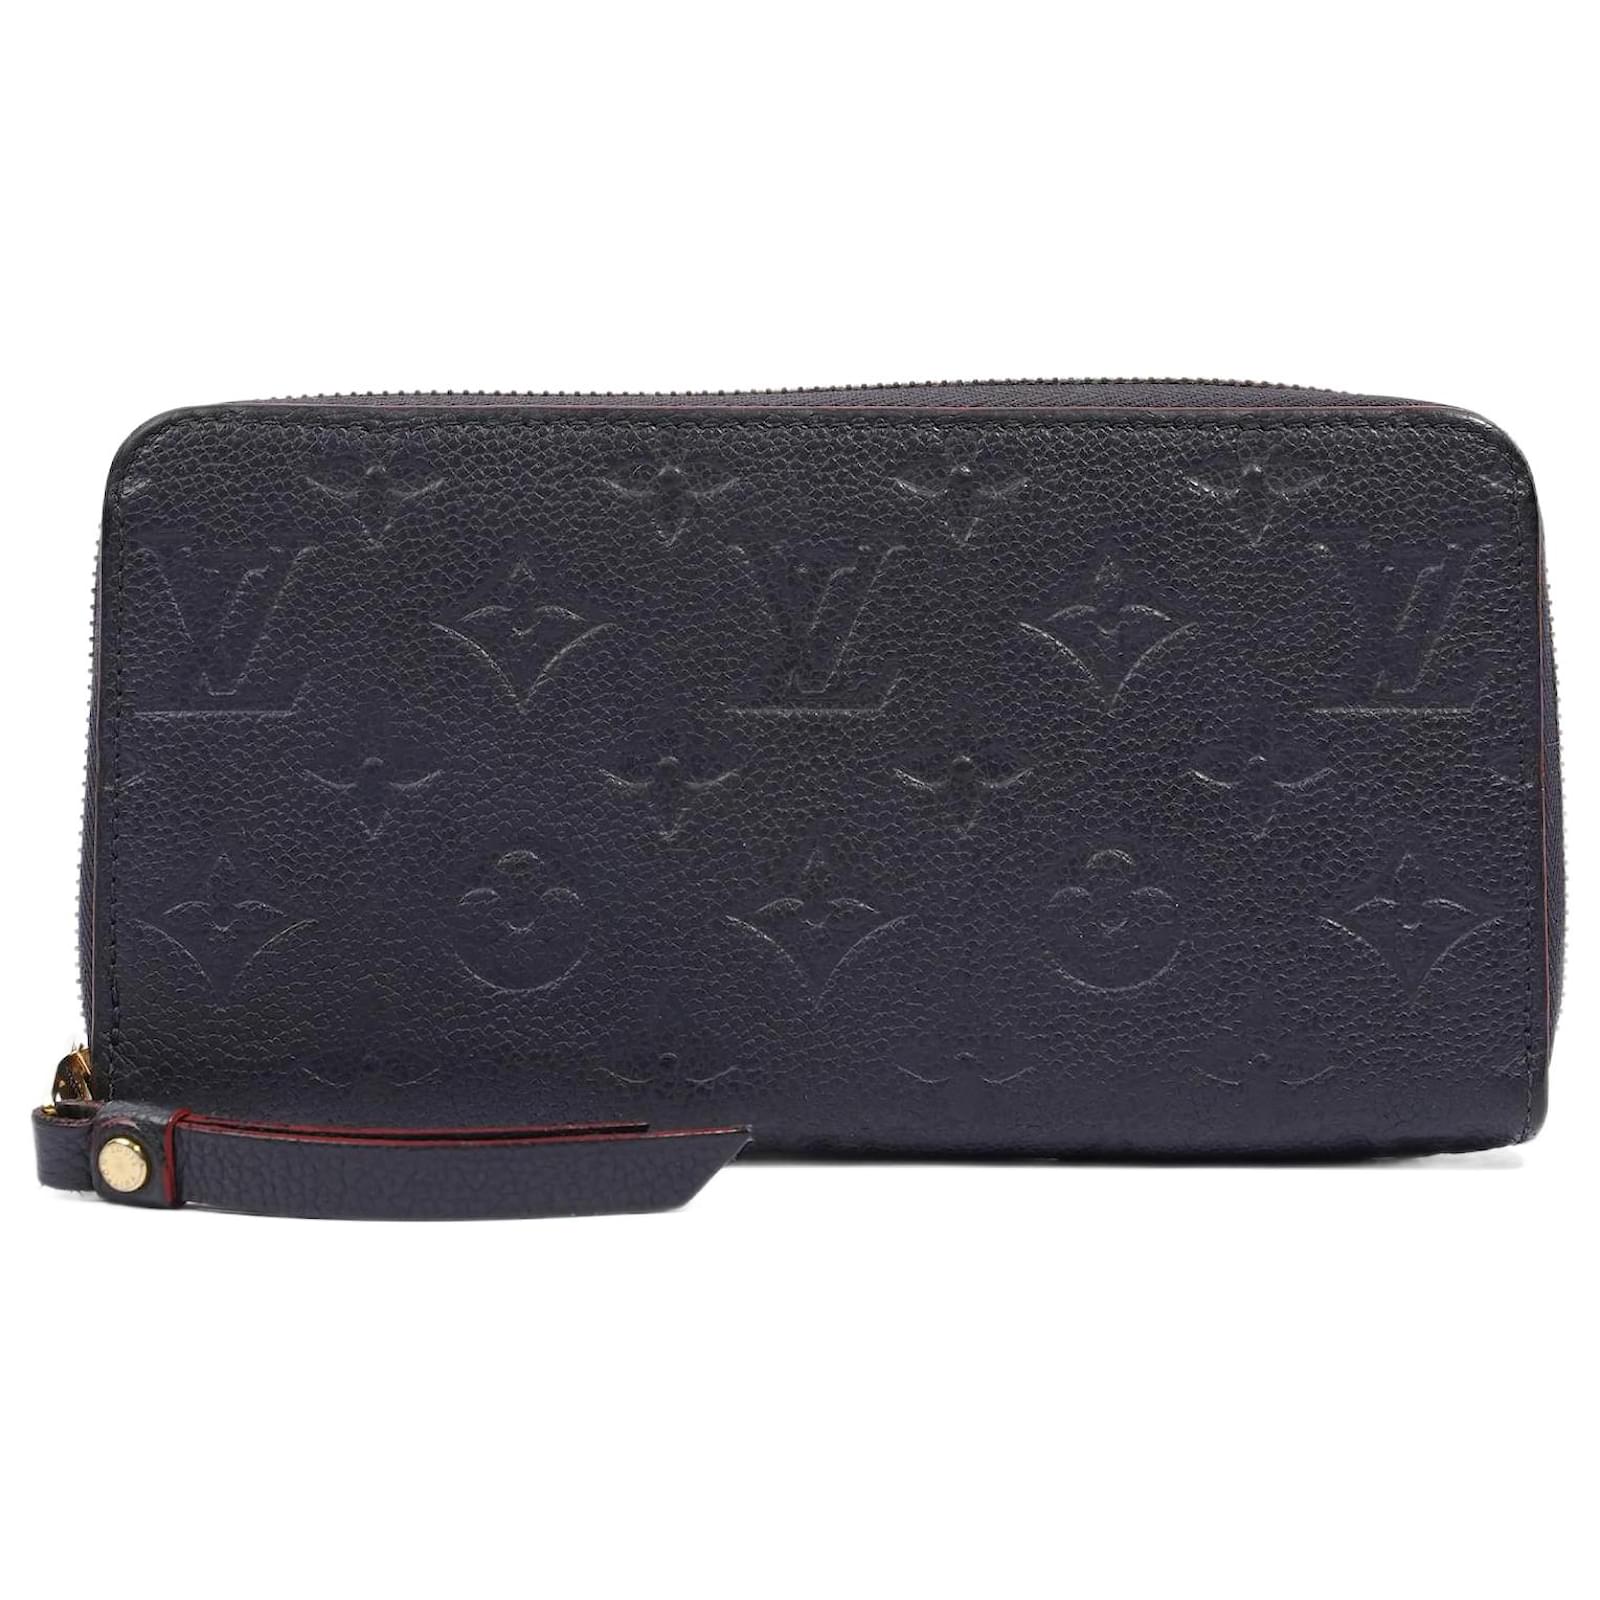 navy blue and red louis vuittons wallet